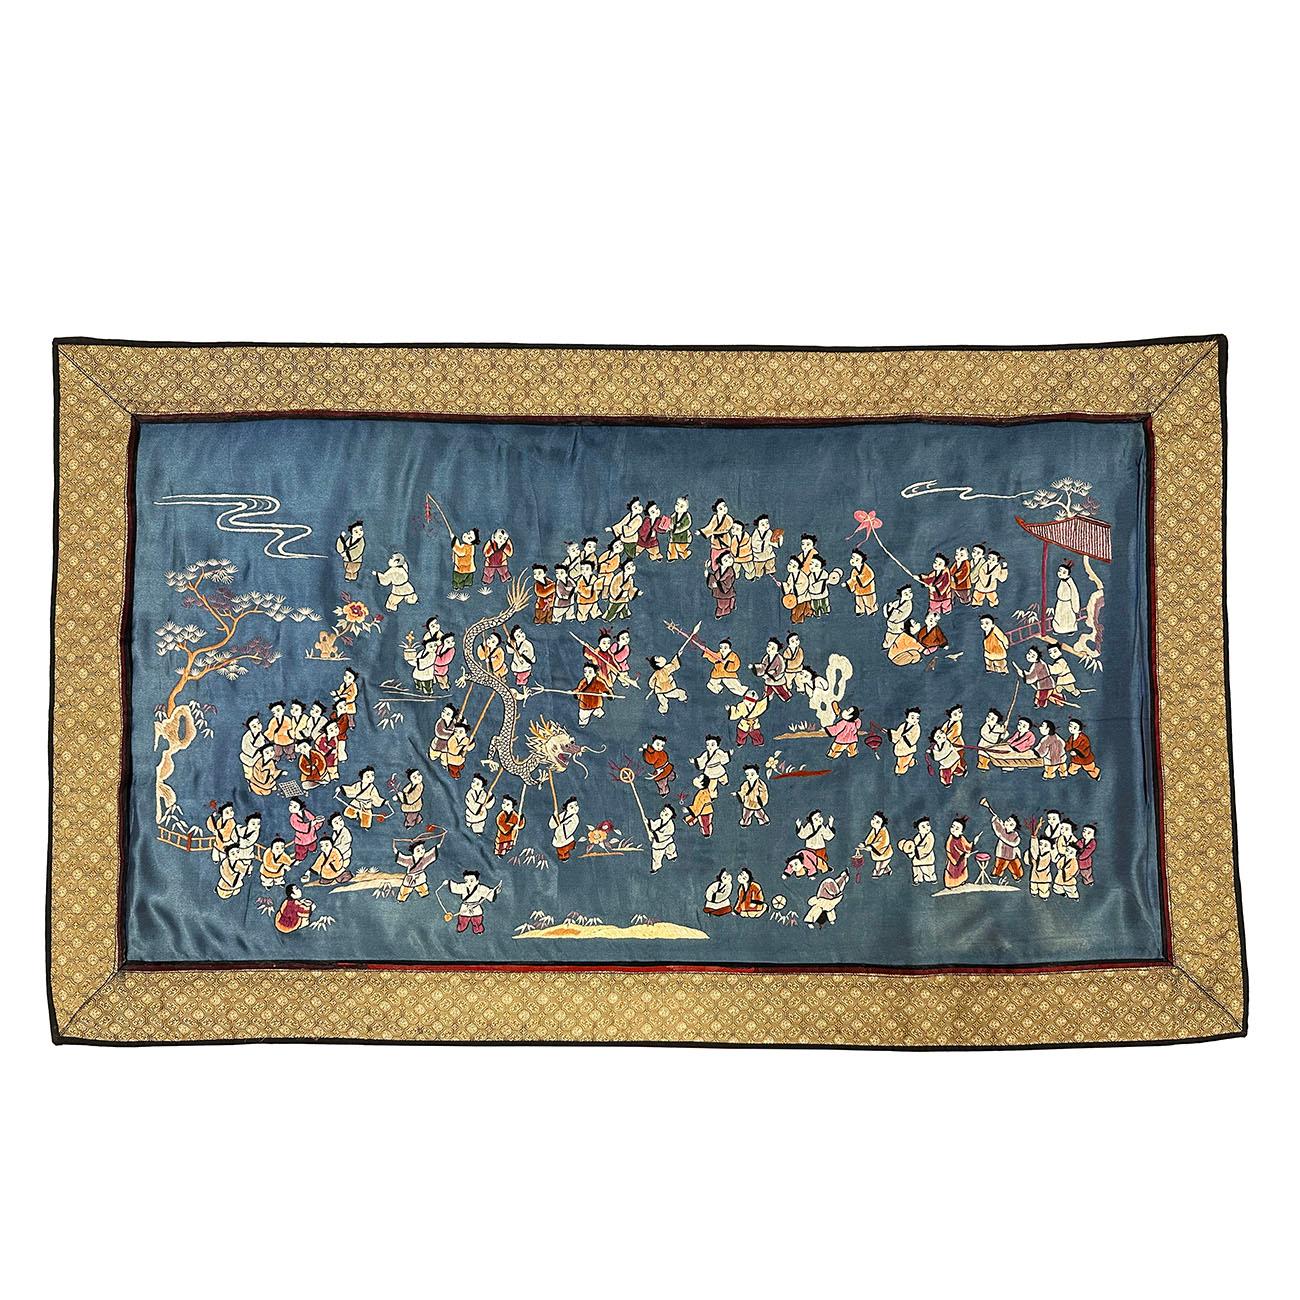 Mid-20th Century Chinese Silk Embroidery Baizi Playing in Spring For Sale